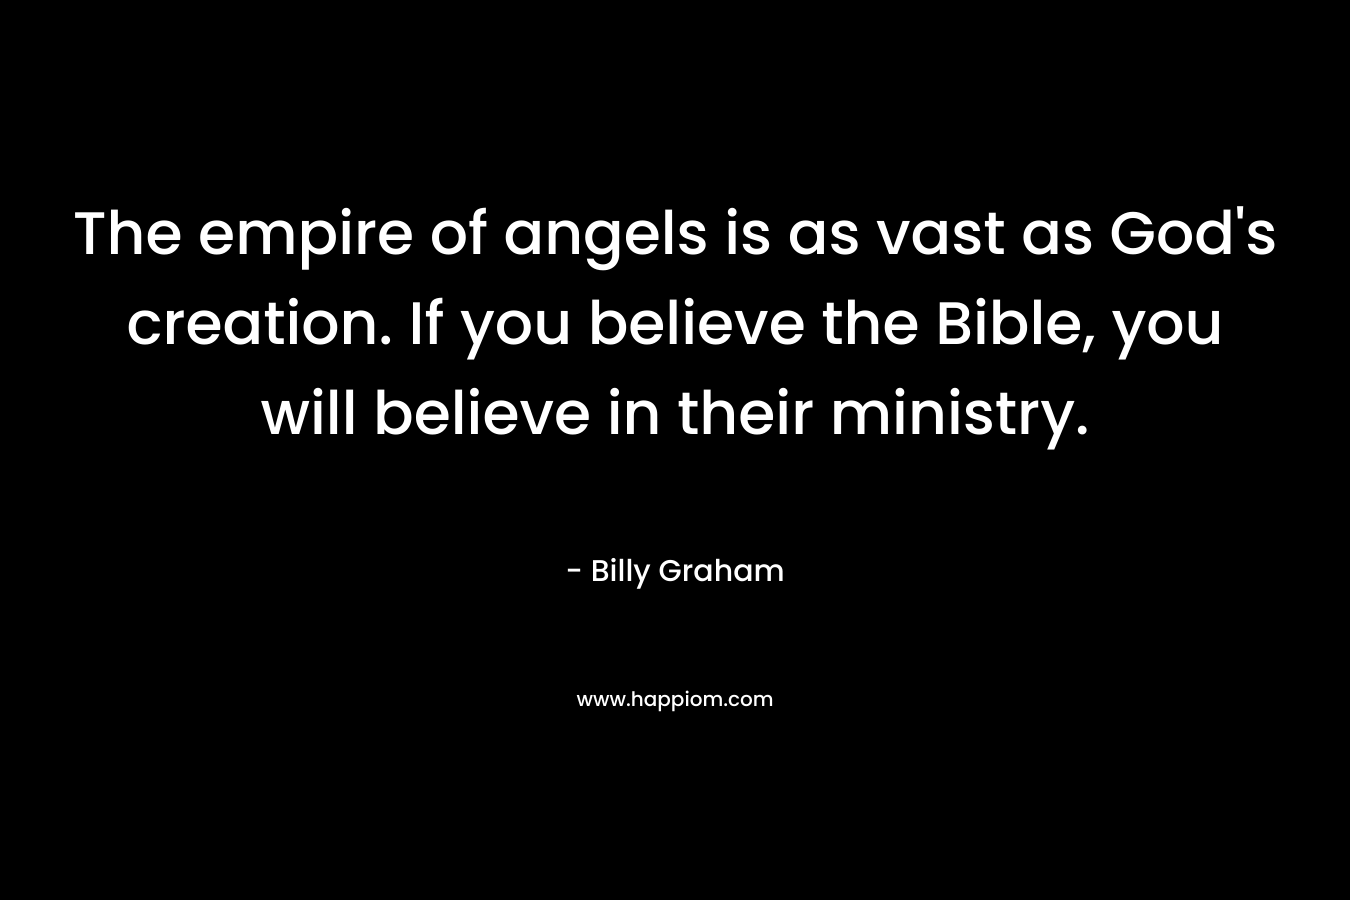 The empire of angels is as vast as God’s creation. If you believe the Bible, you will believe in their ministry. – Billy Graham